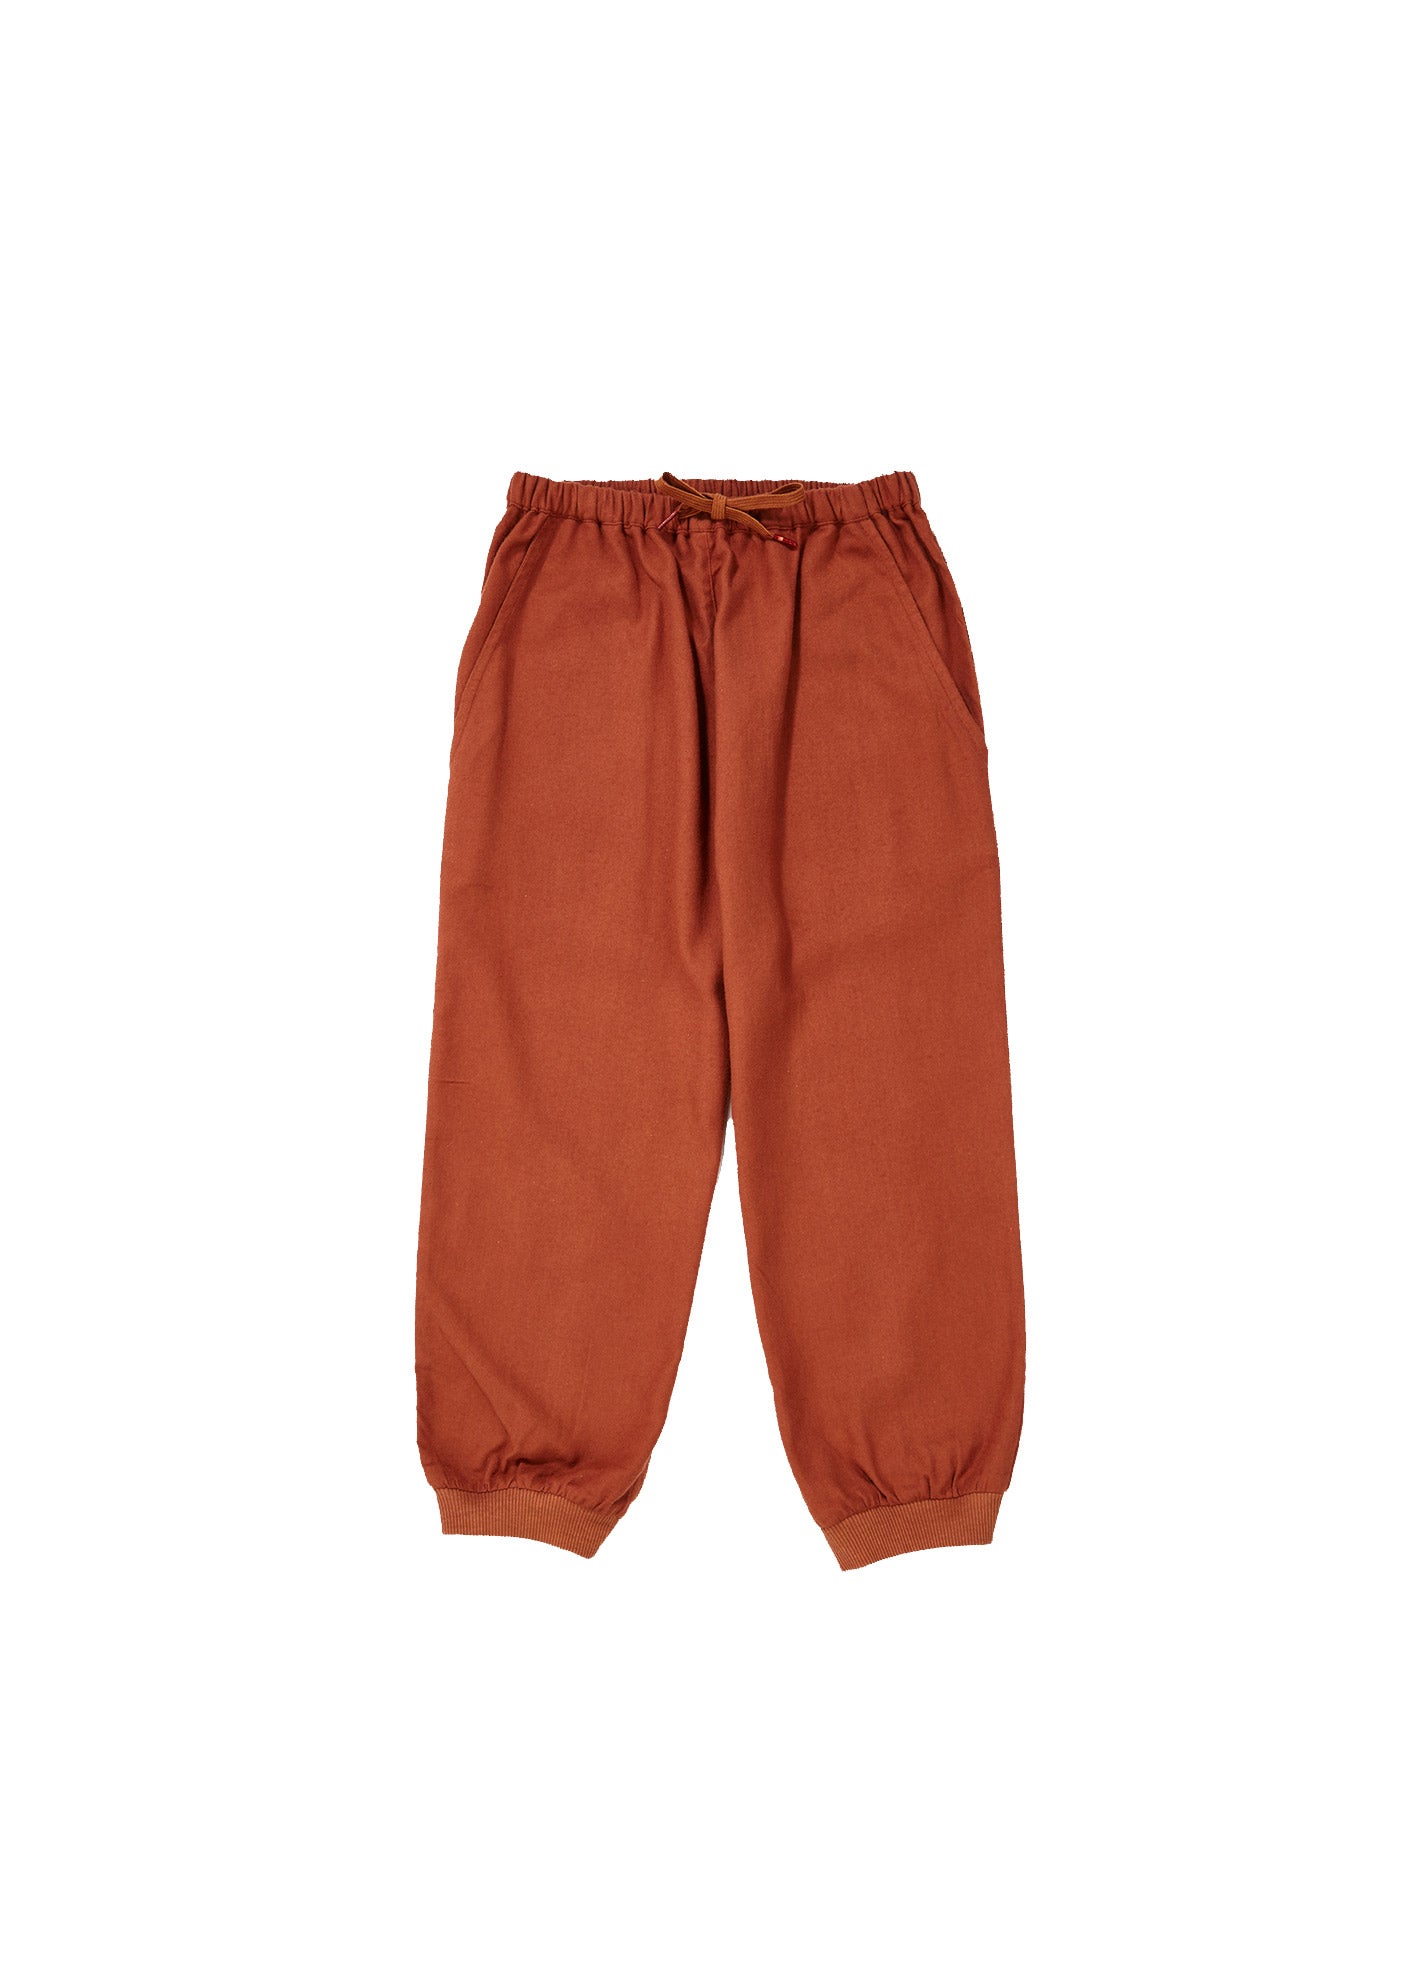 Girls Red Brown Cotton Trousers